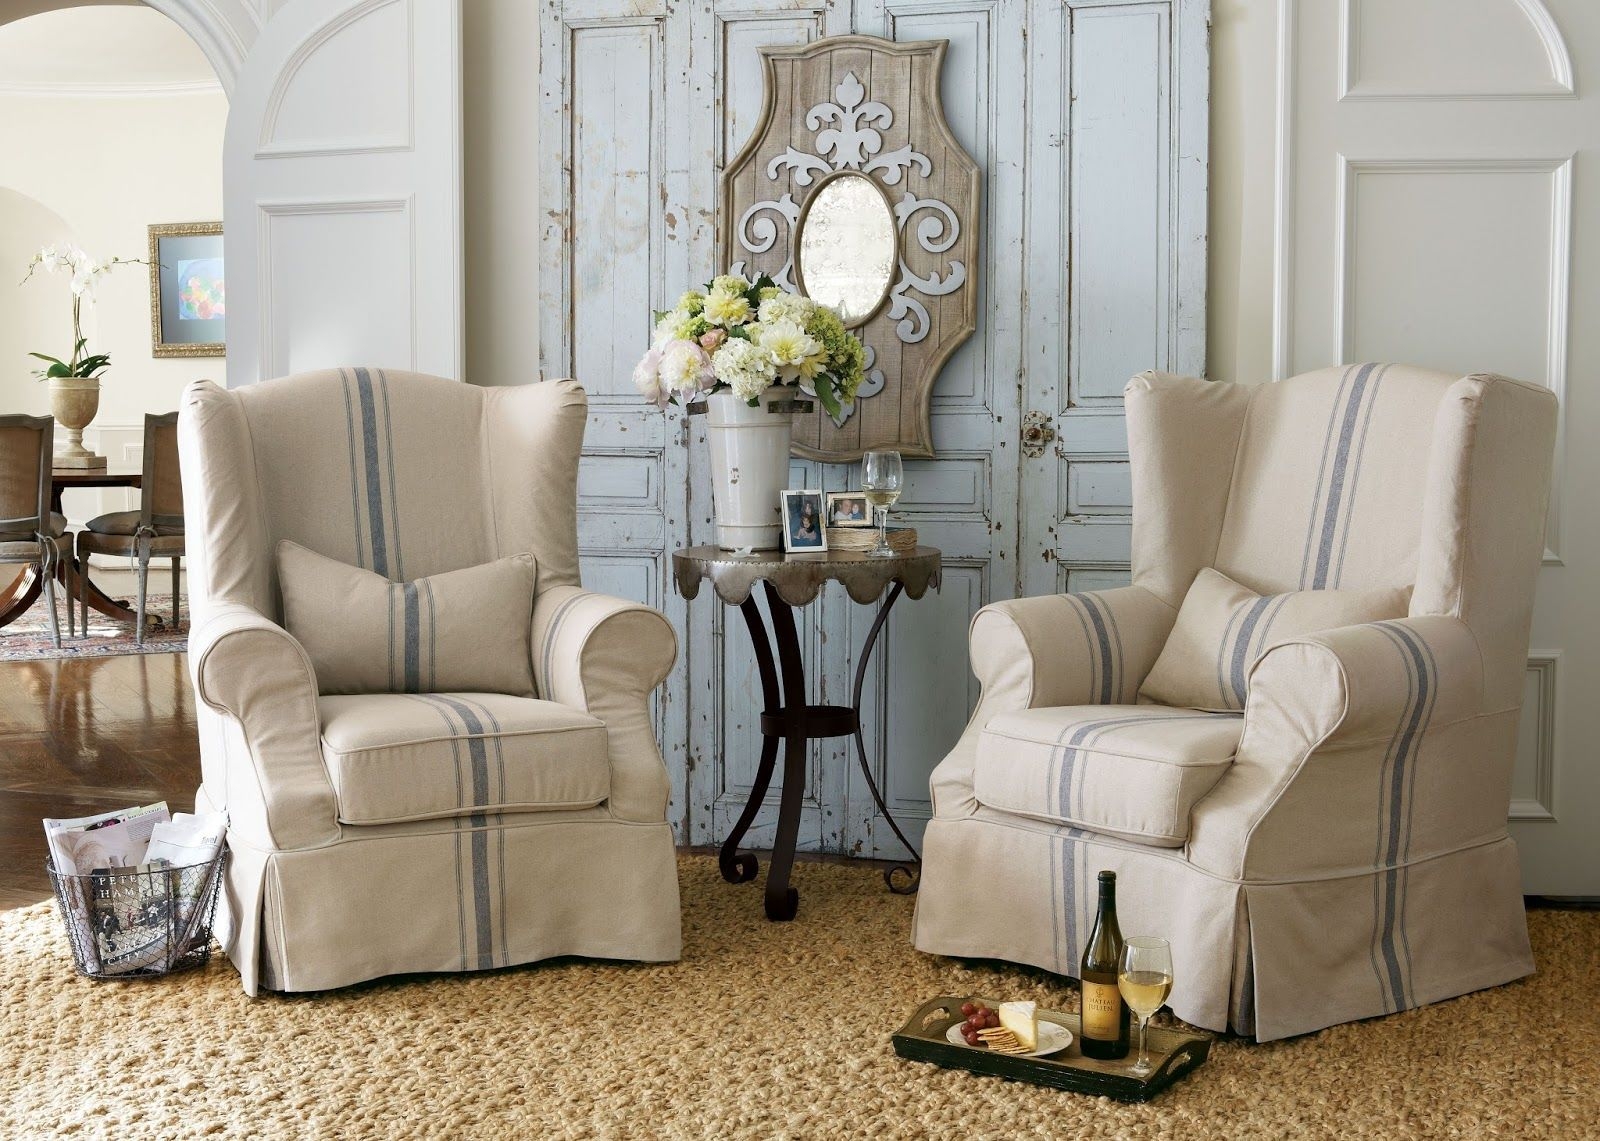 Slipcovers for accent chairs